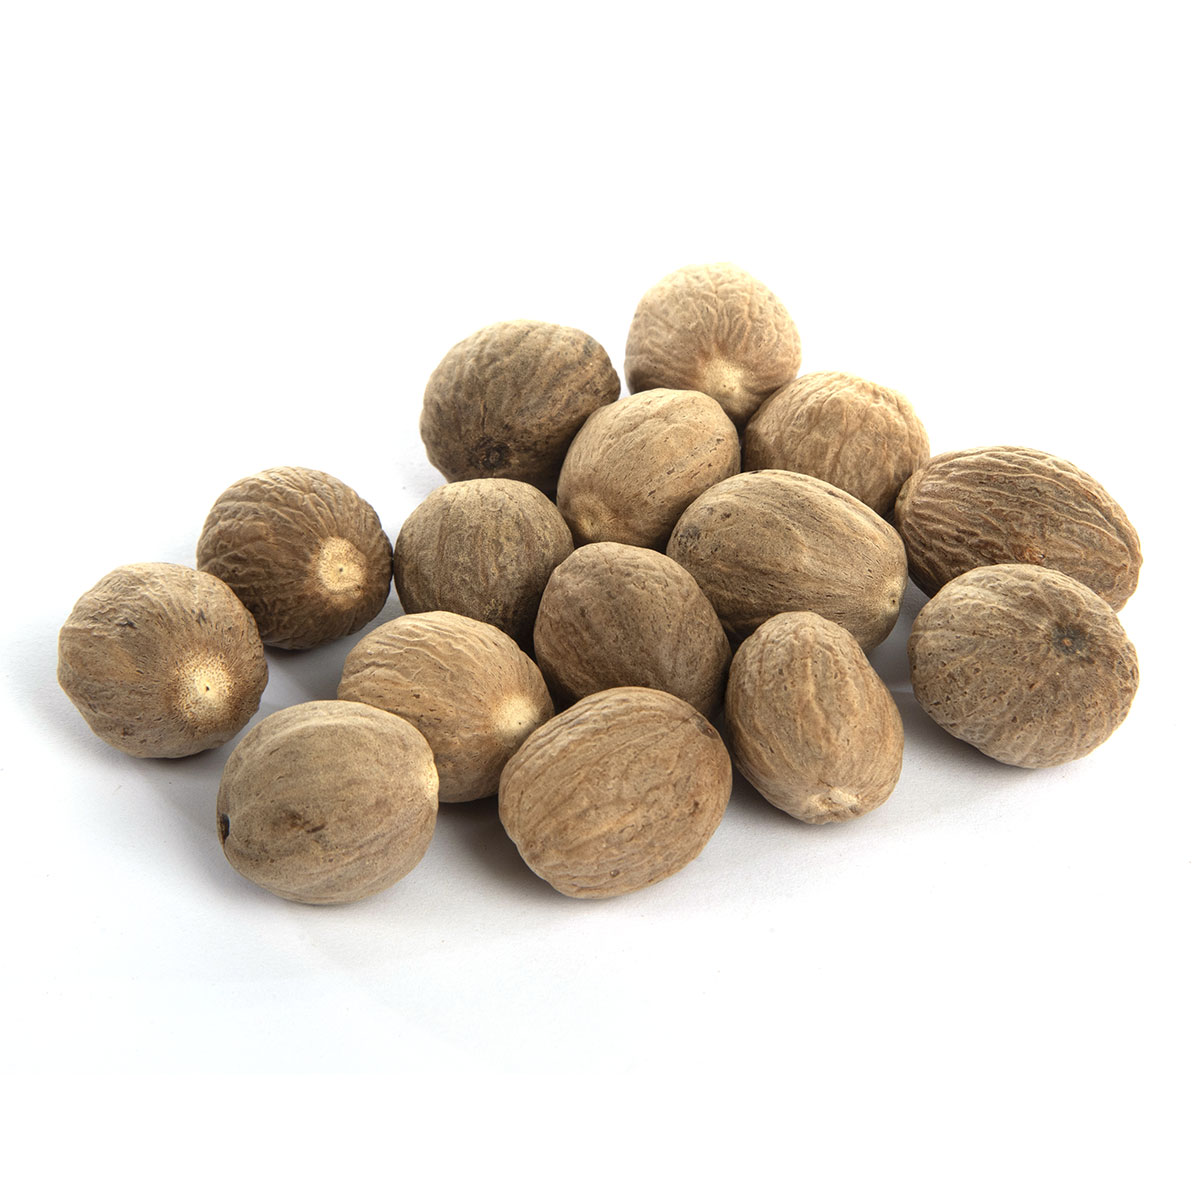 Buy Spices Online - Nutmegs Whole